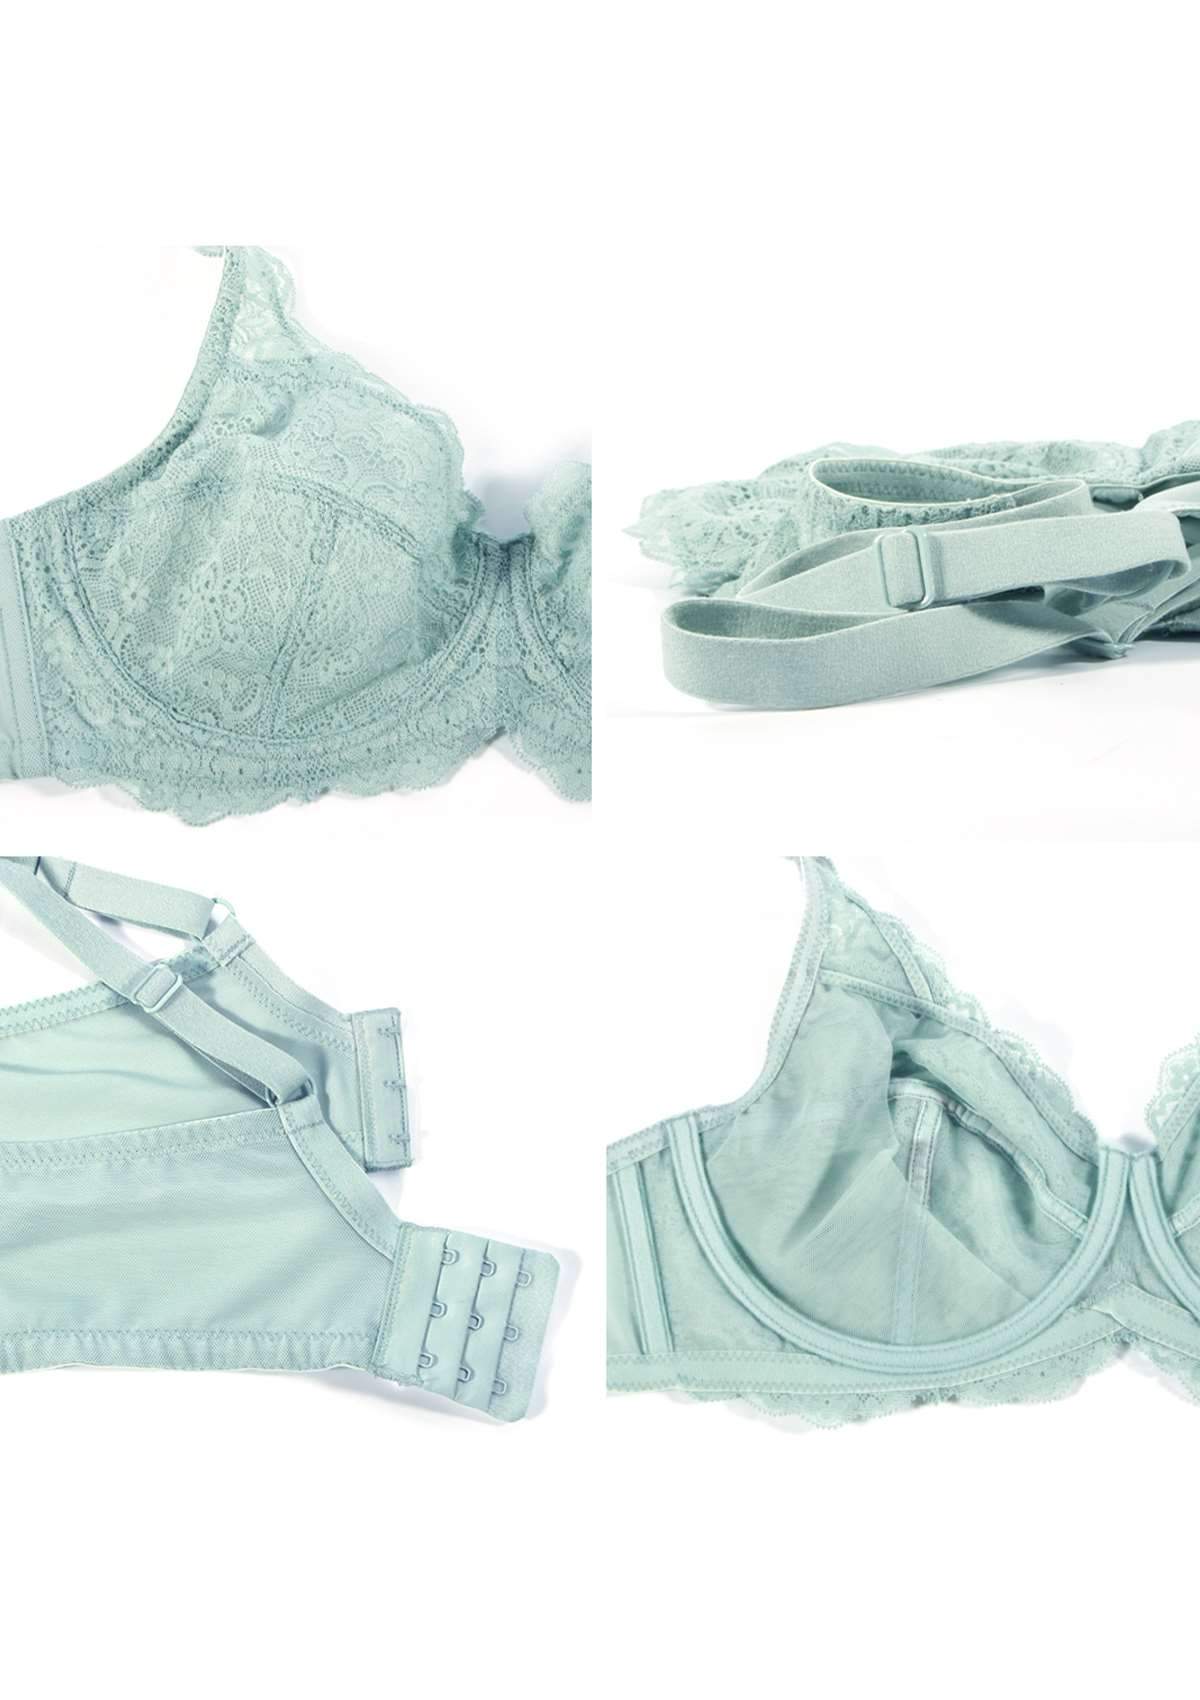 HSIA All-Over Floral Lace: Best Bra For Elderly With Sagging Breasts - Crystal Blue / 36 / DD/E